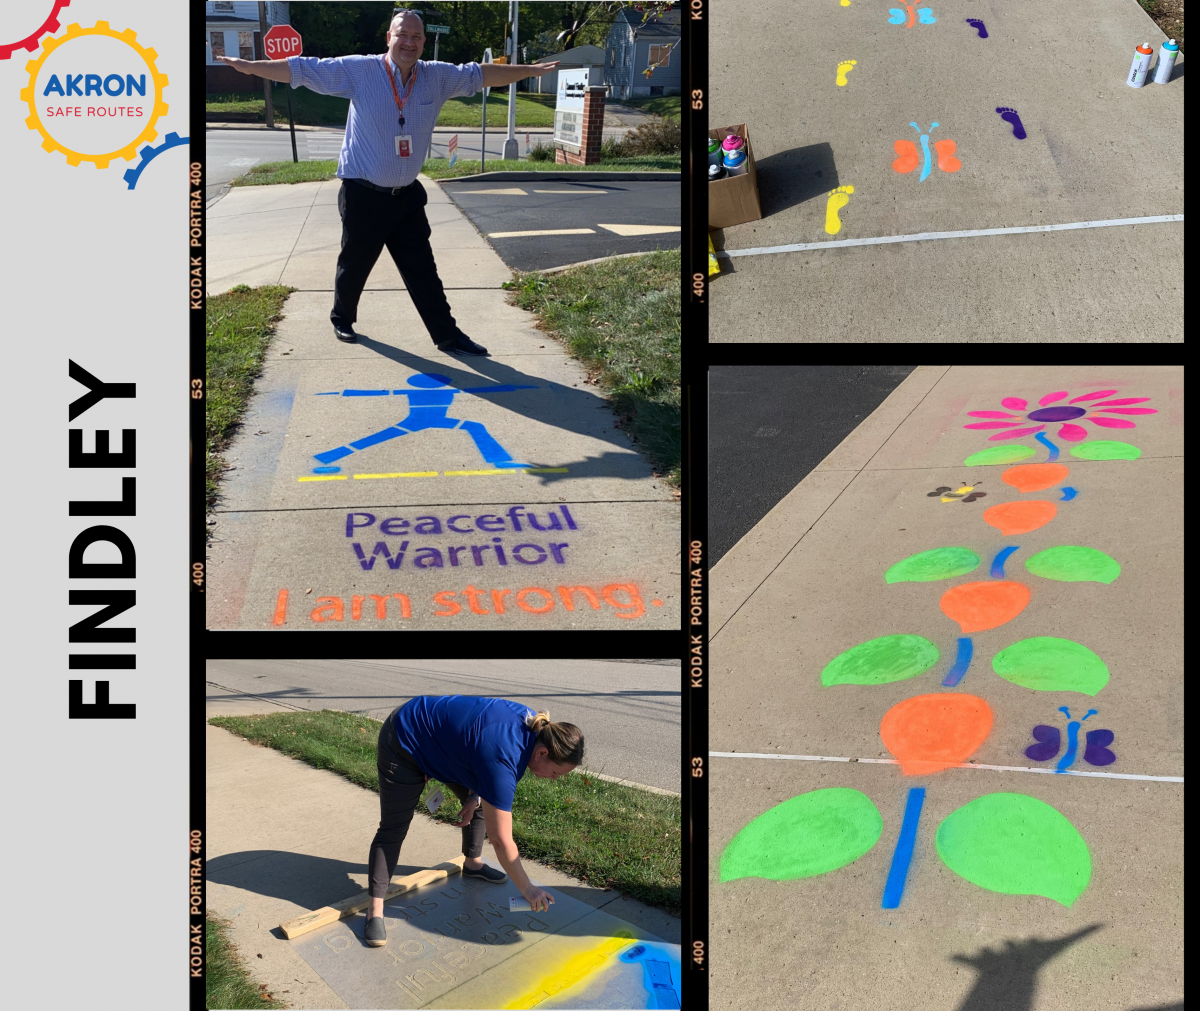 Image of painted activity stations, yoga poses, hopscotch, and wayfinding animal prints on the sidewalks.